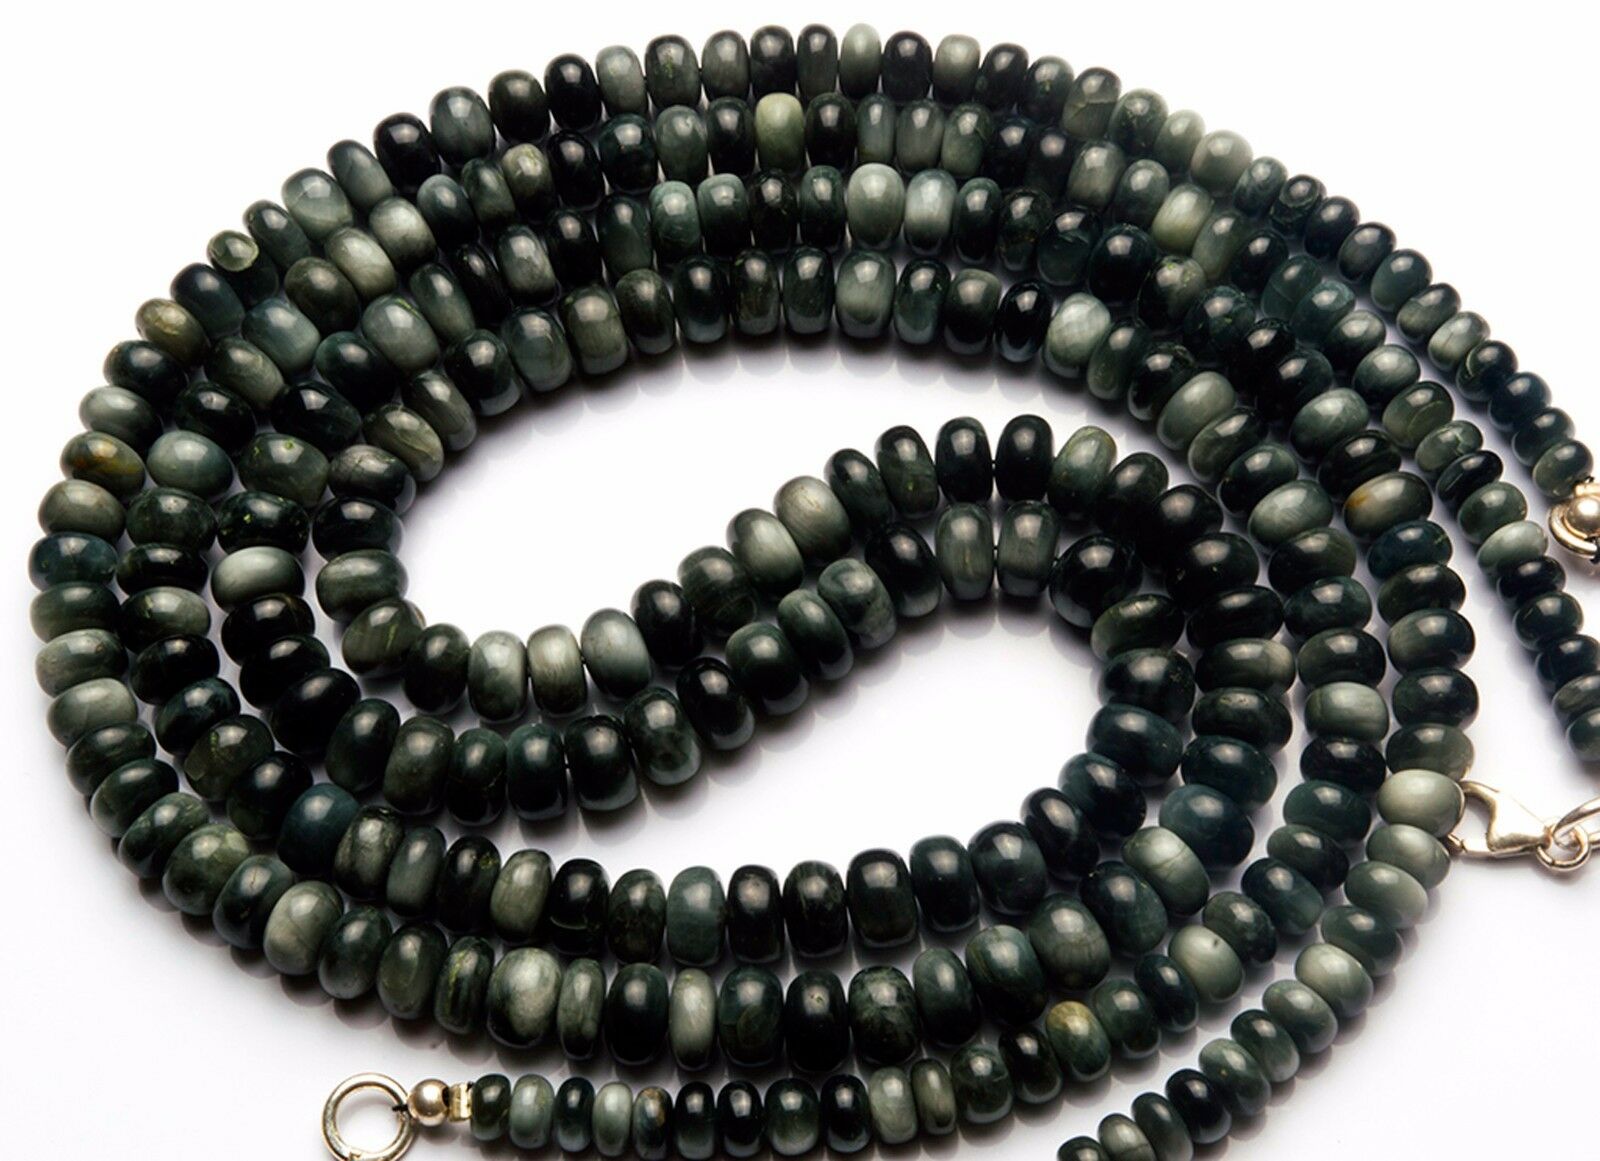 140cts Natural Black Chrysoberyl Cats Eye Smooth 4-6mm Rondelle Beads Neck. 19"